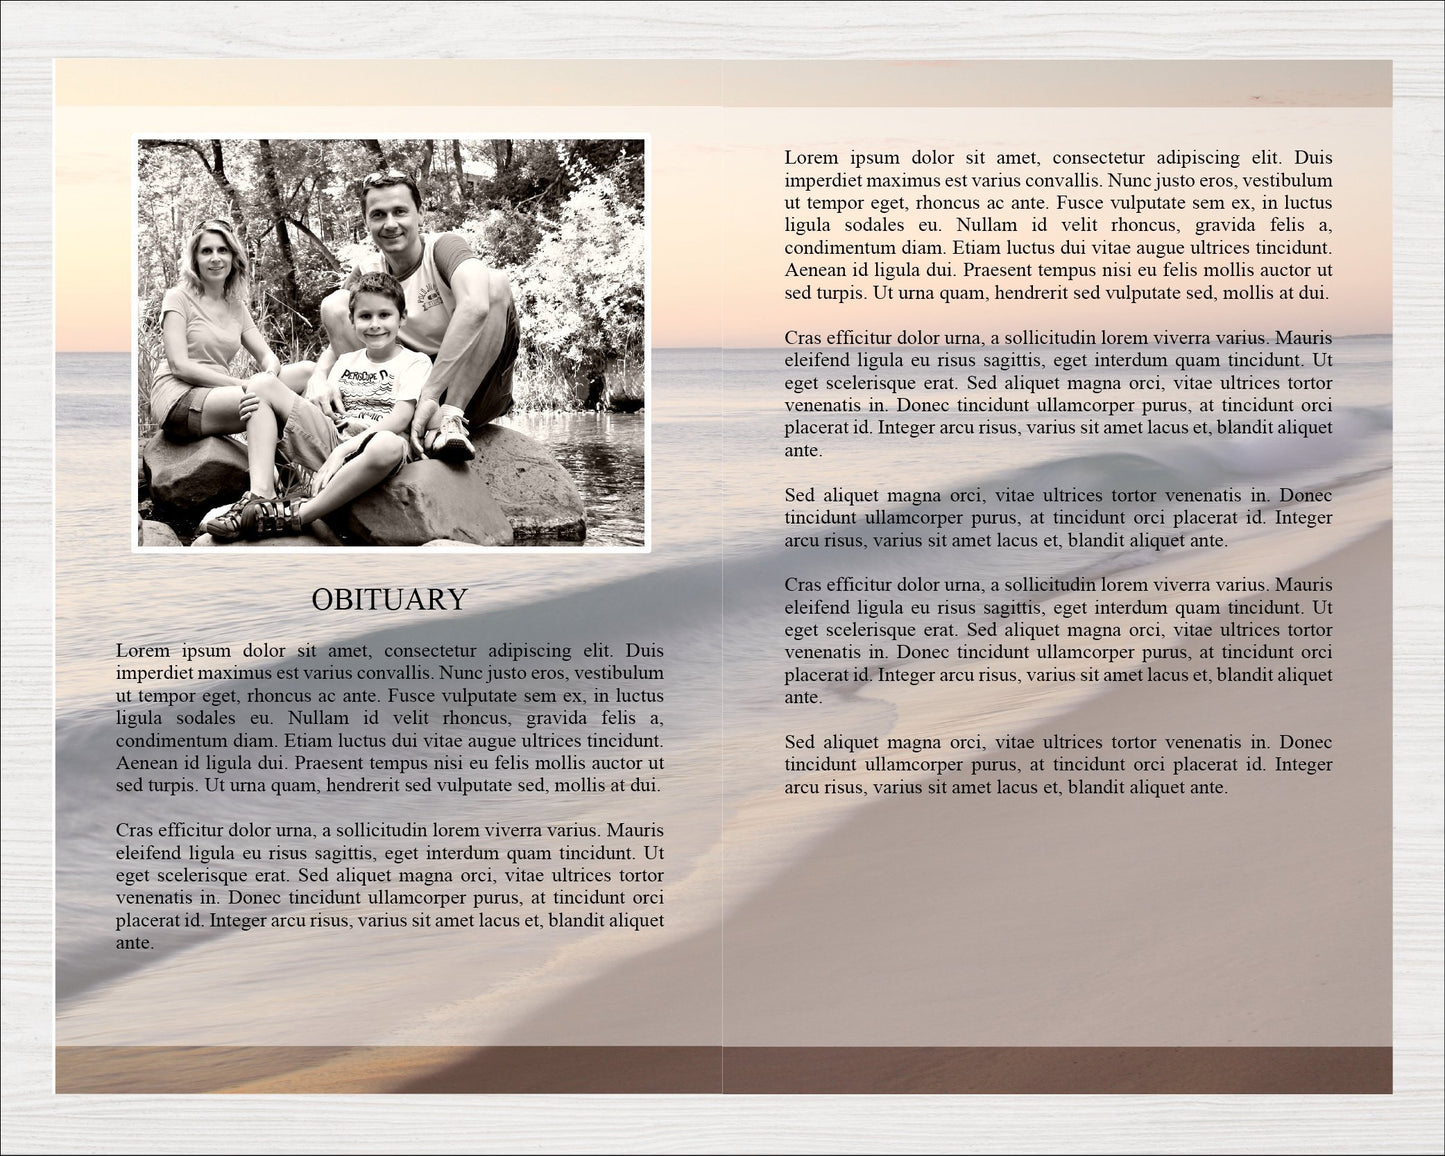 8 Page Beach Wave Funeral Program Template